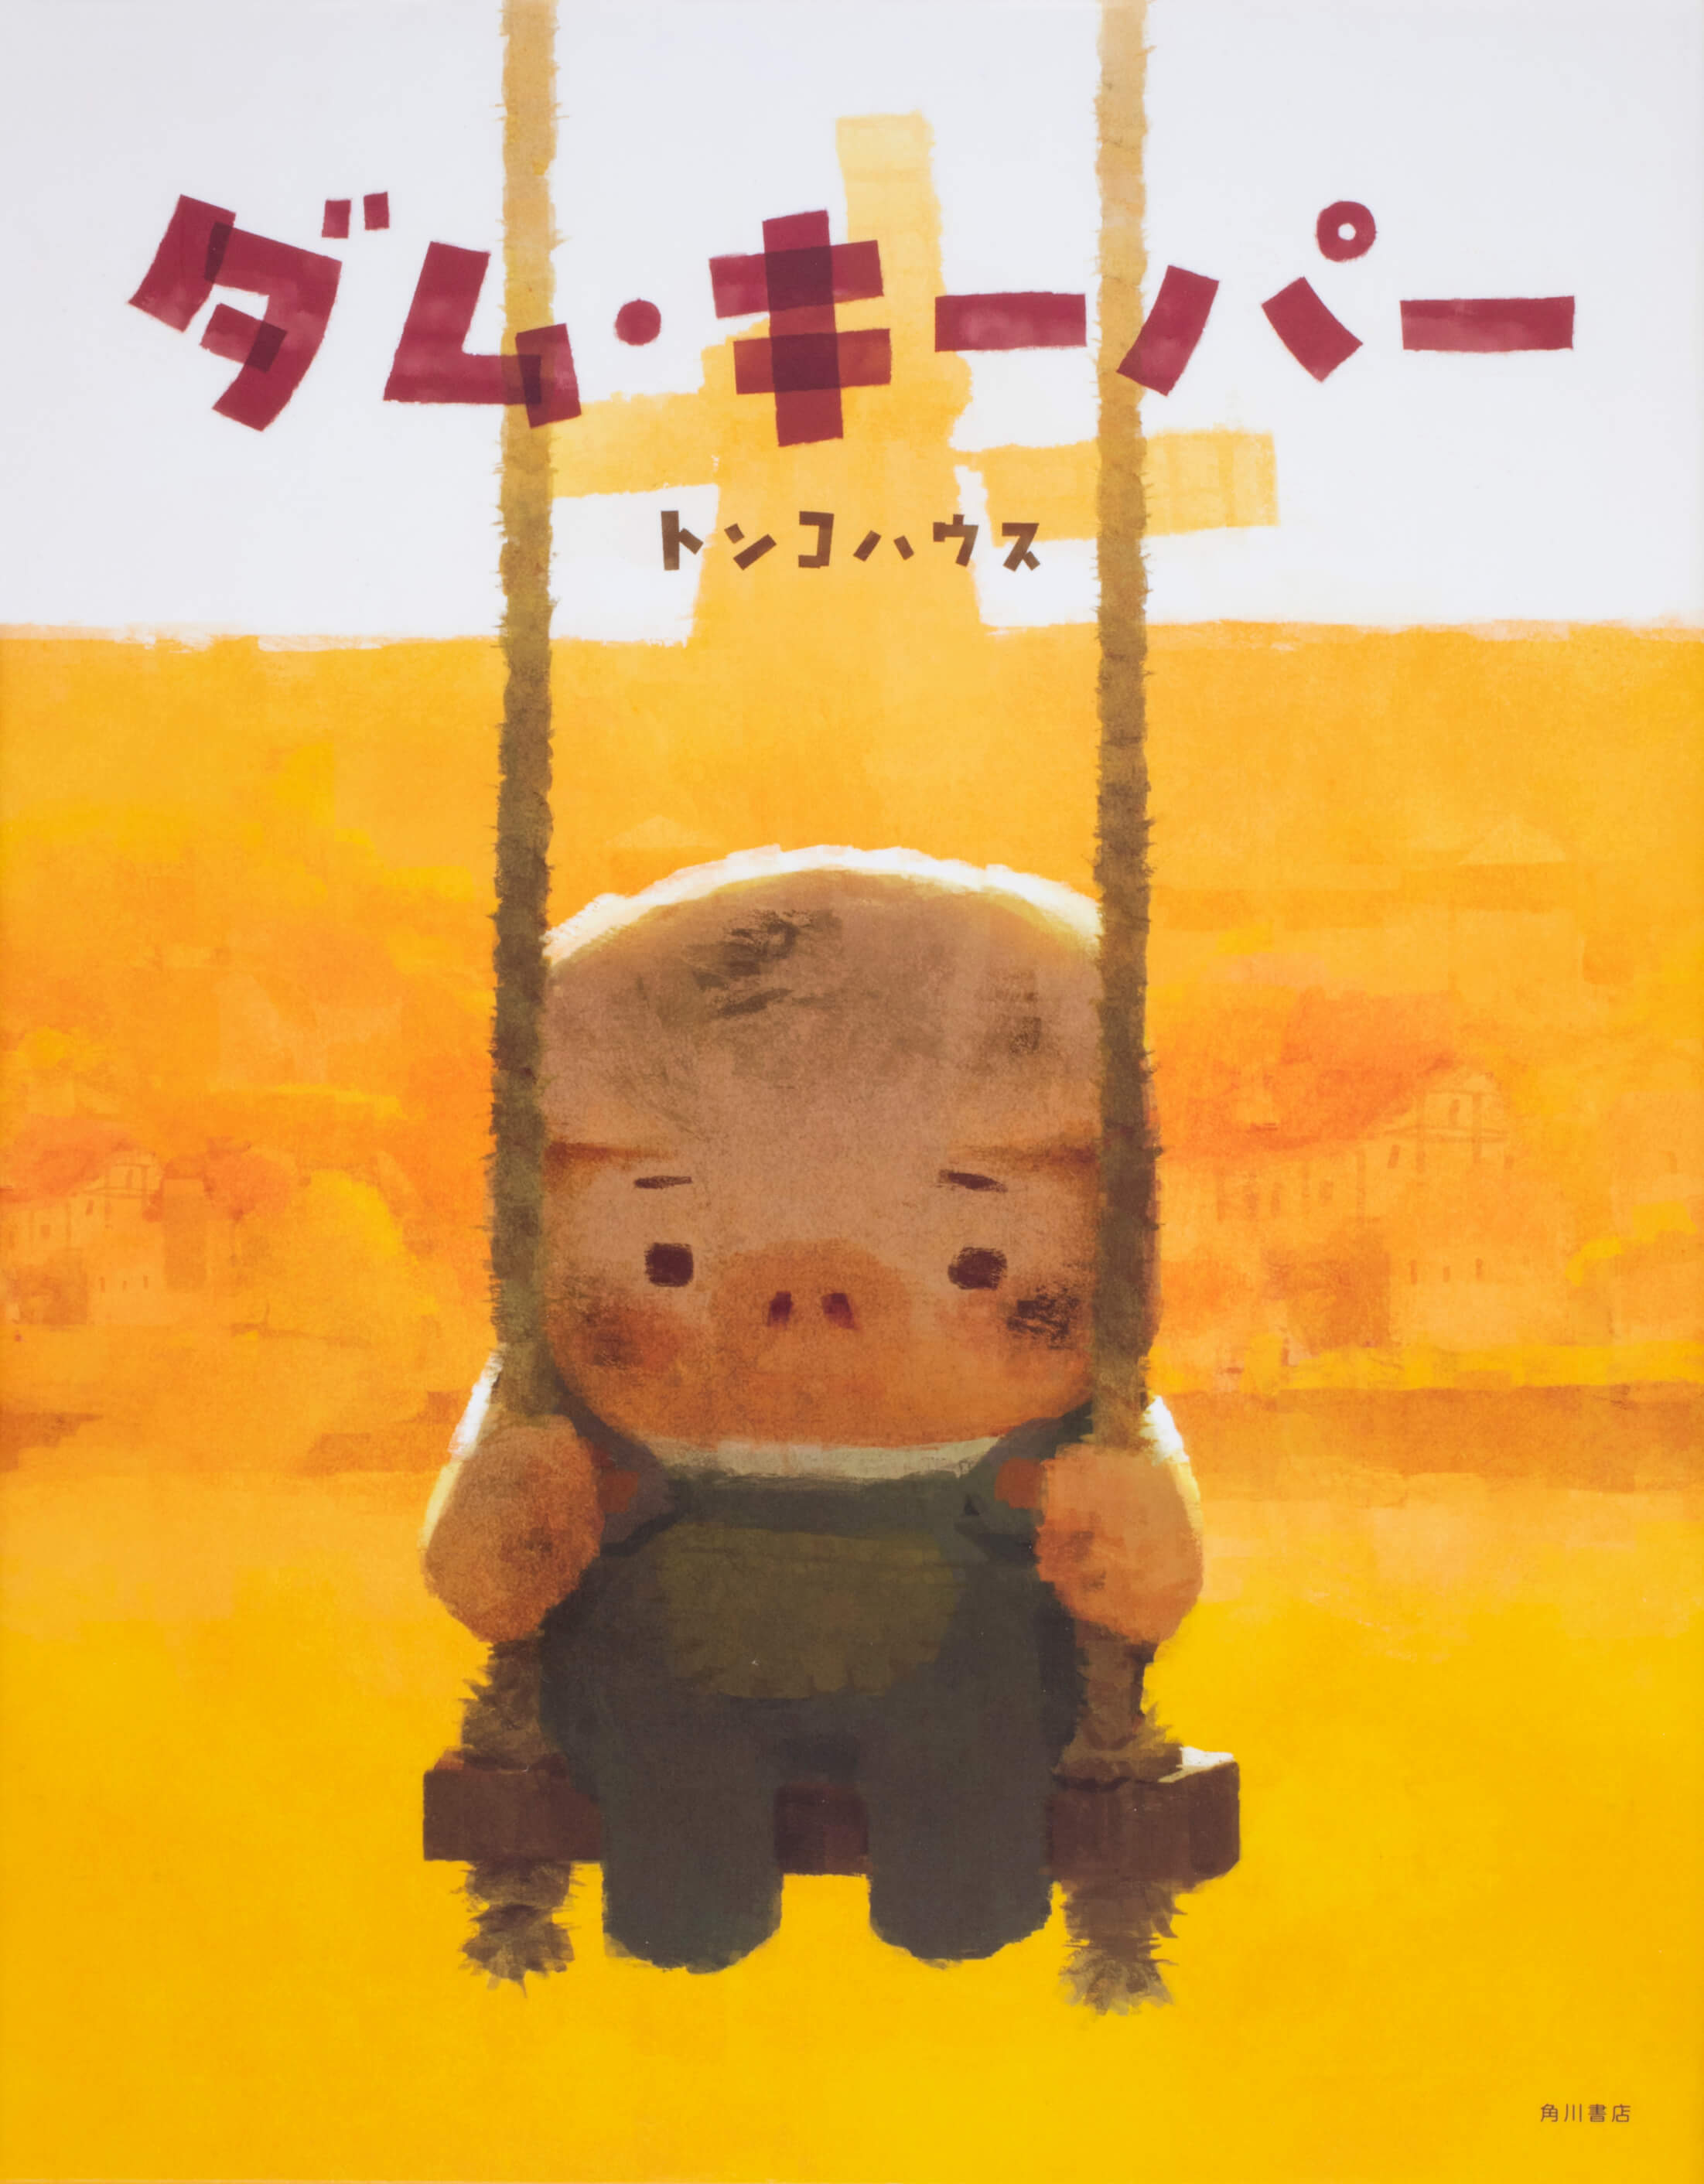 Tonko House S Short Film The Dam Keeper Is Now Streaming On Youtube For A Limited Time Moshi Moshi Nippon ã‚‚ã—ã‚‚ã—ã«ã£ã½ã‚